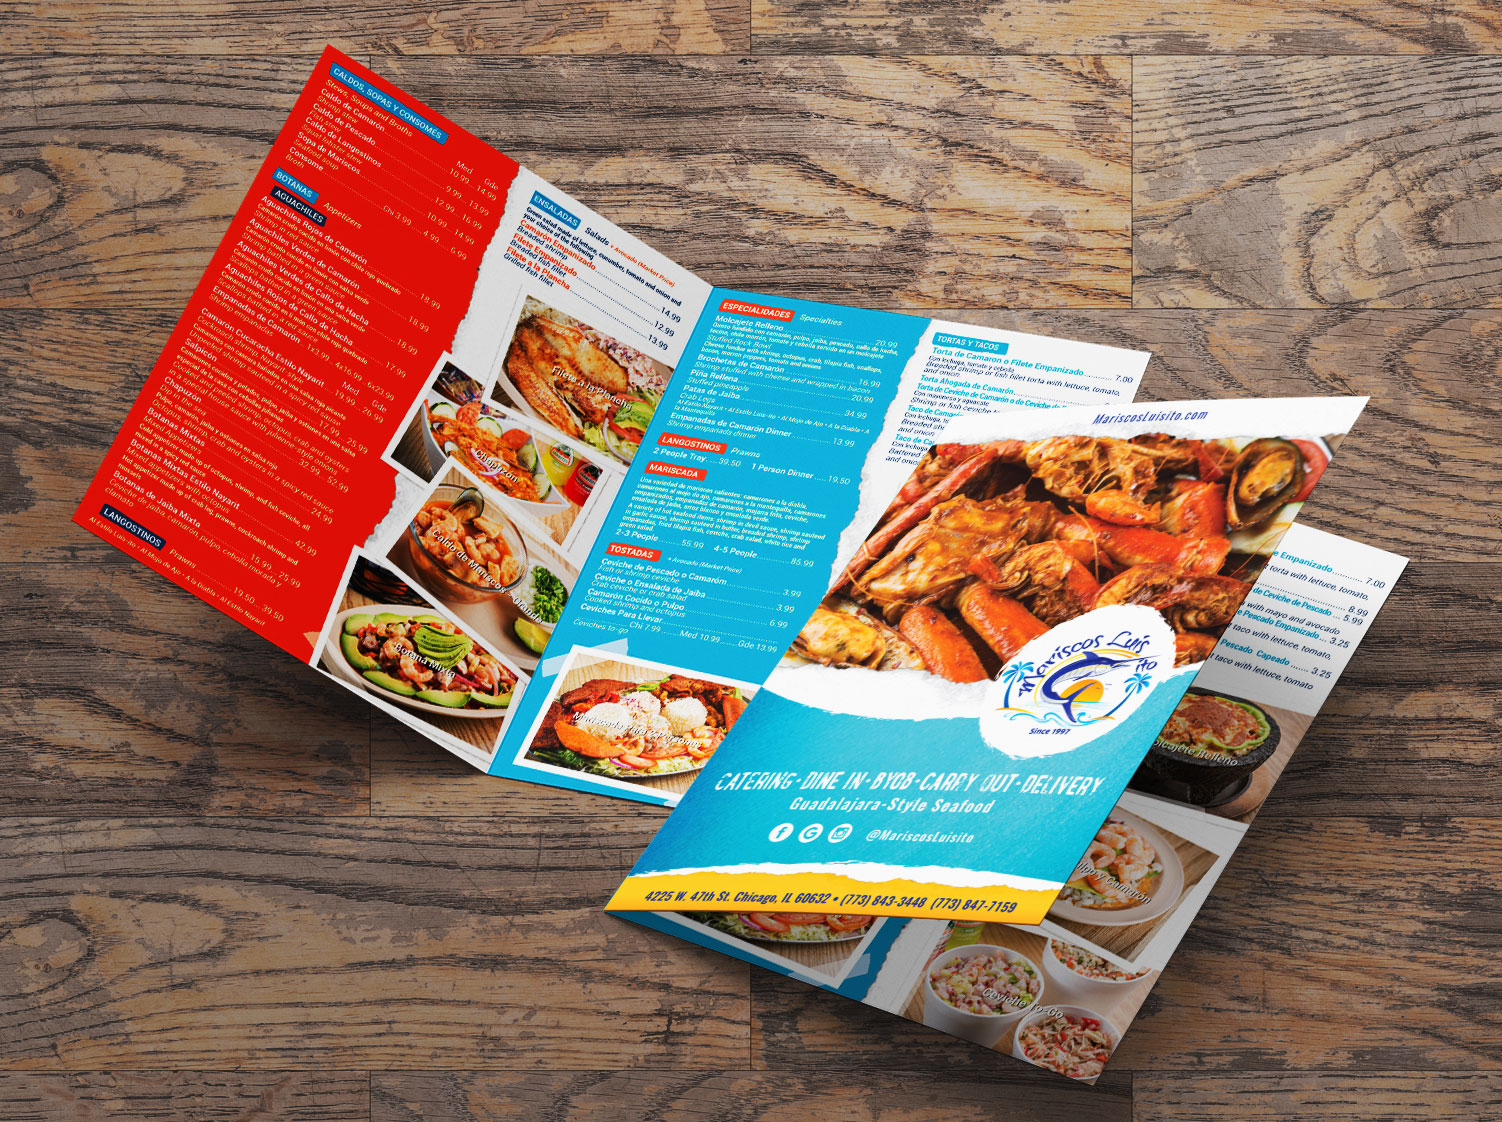 Mariscos Luisito Menu For A Seafood Restaurant Based In Chicago Il